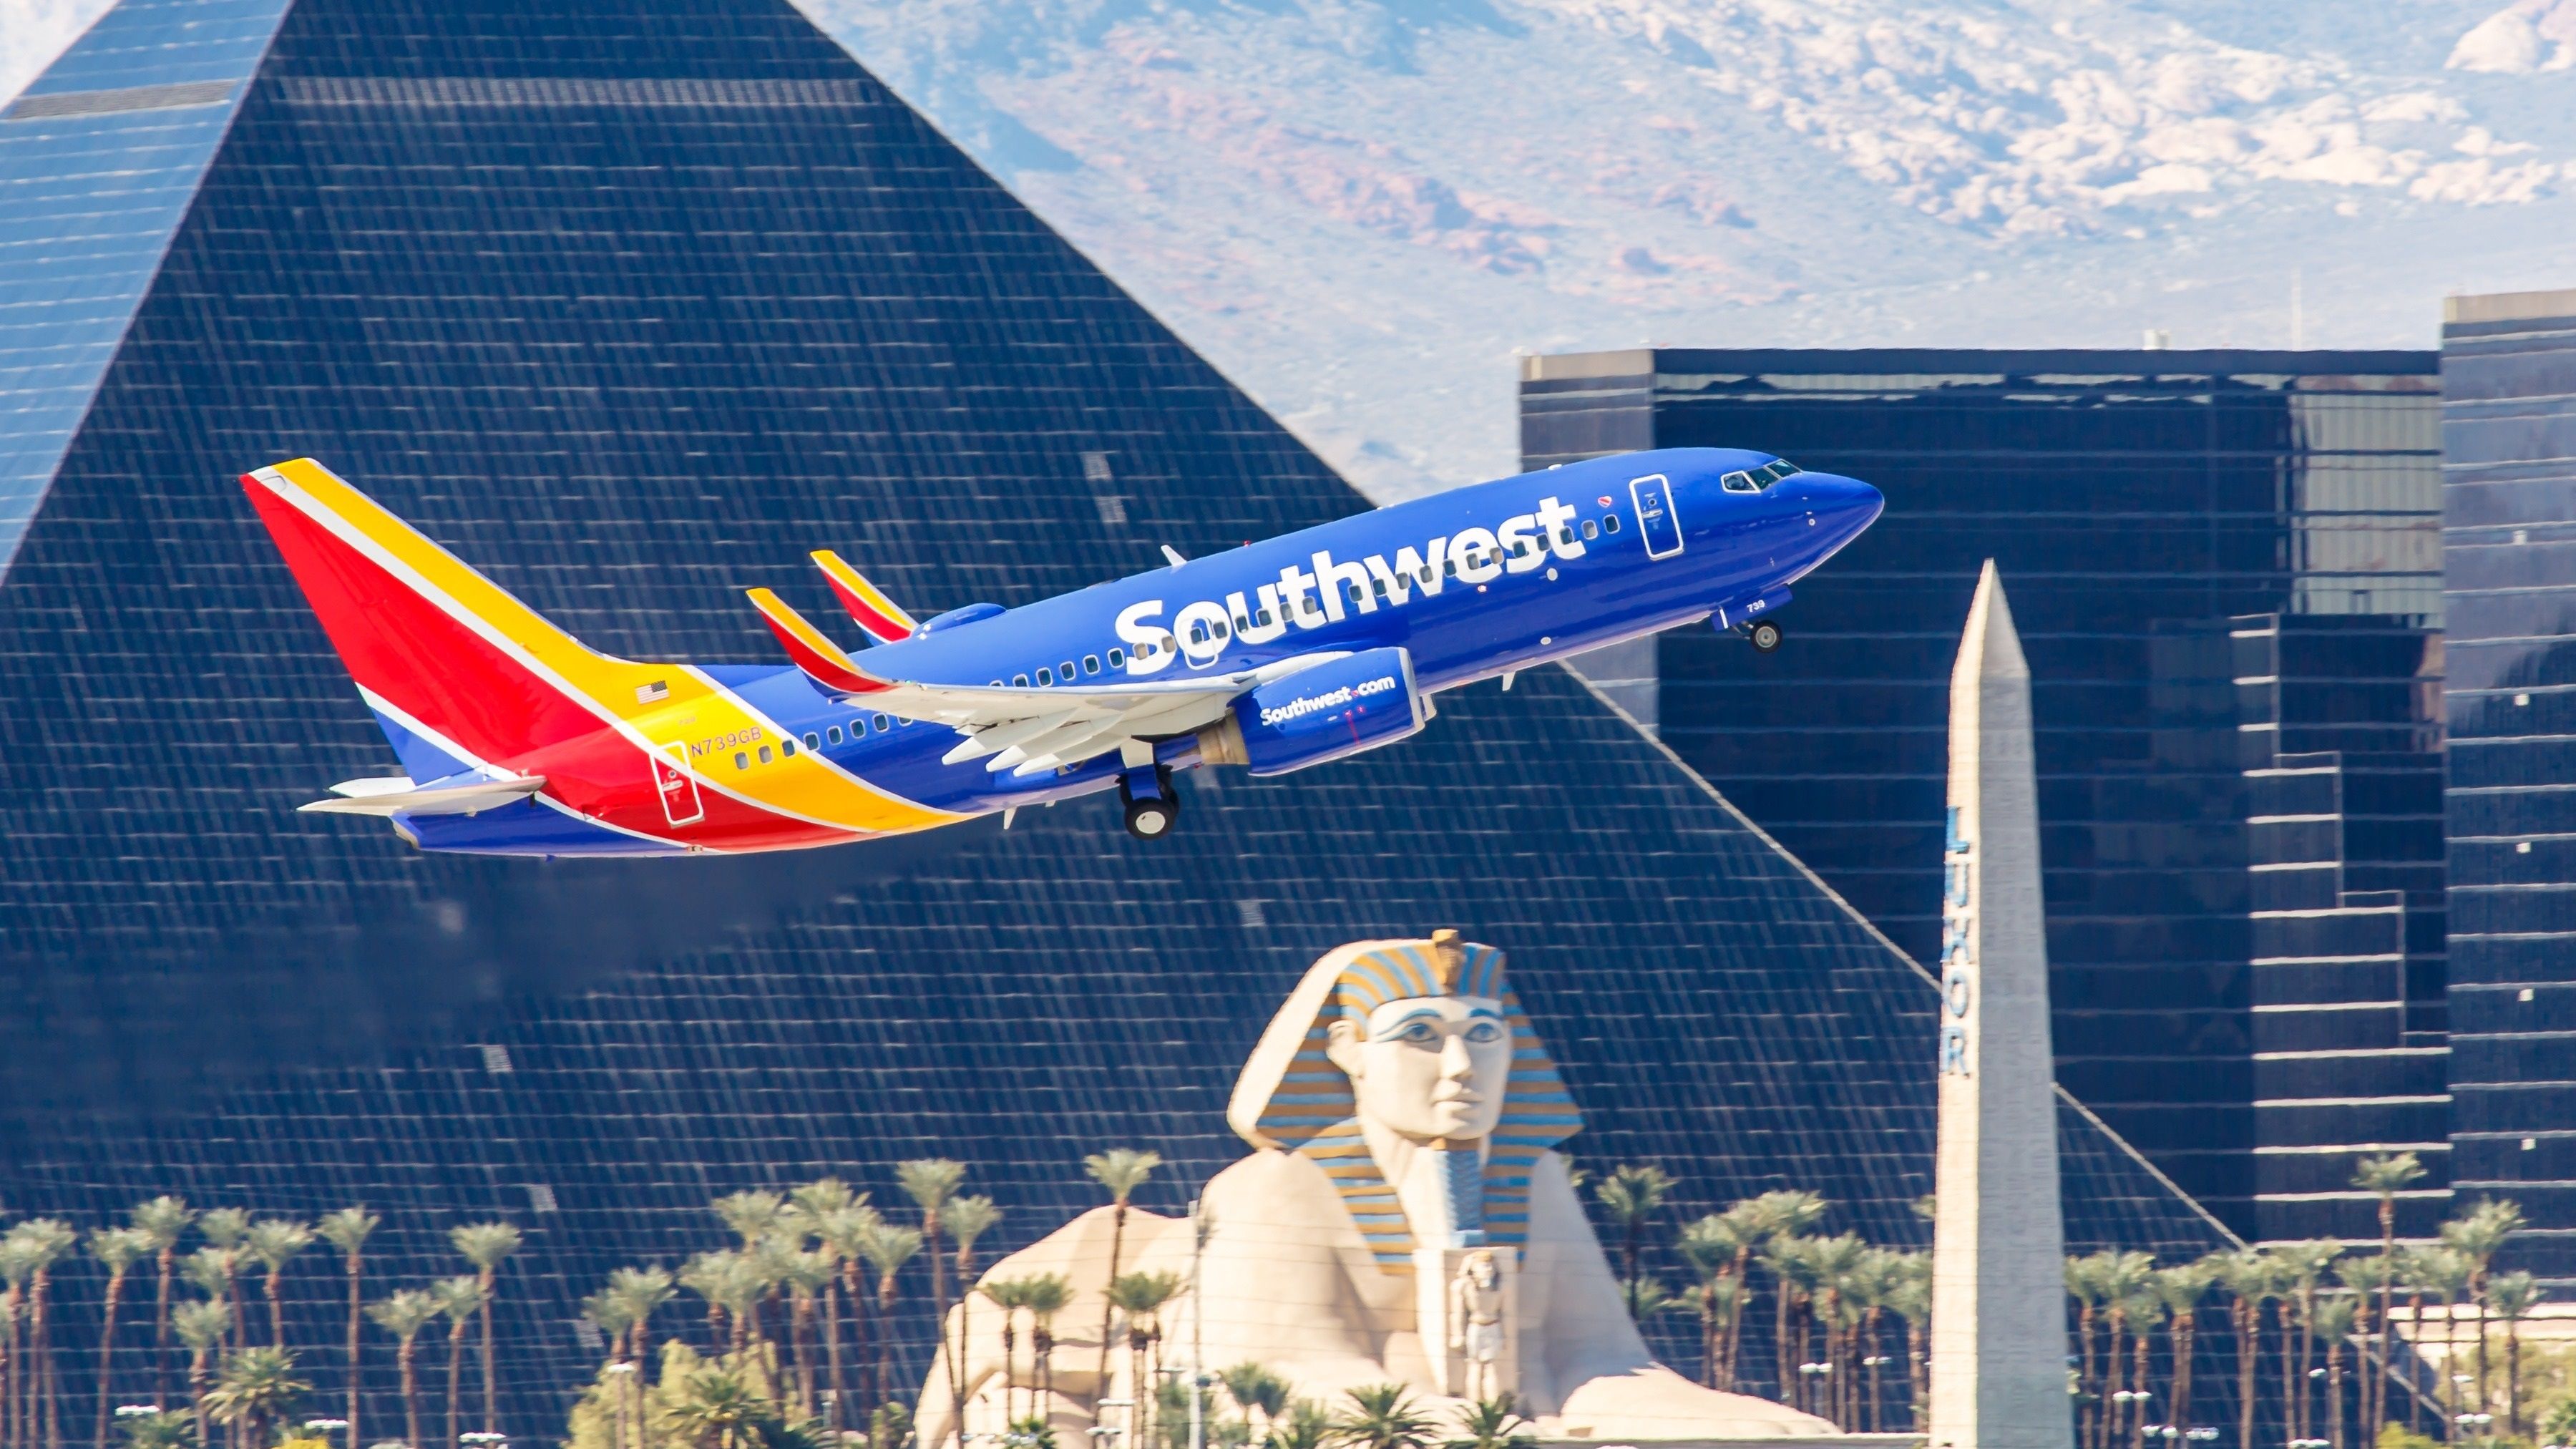 A Southwest Airlines Boeing 737-700 taking off.